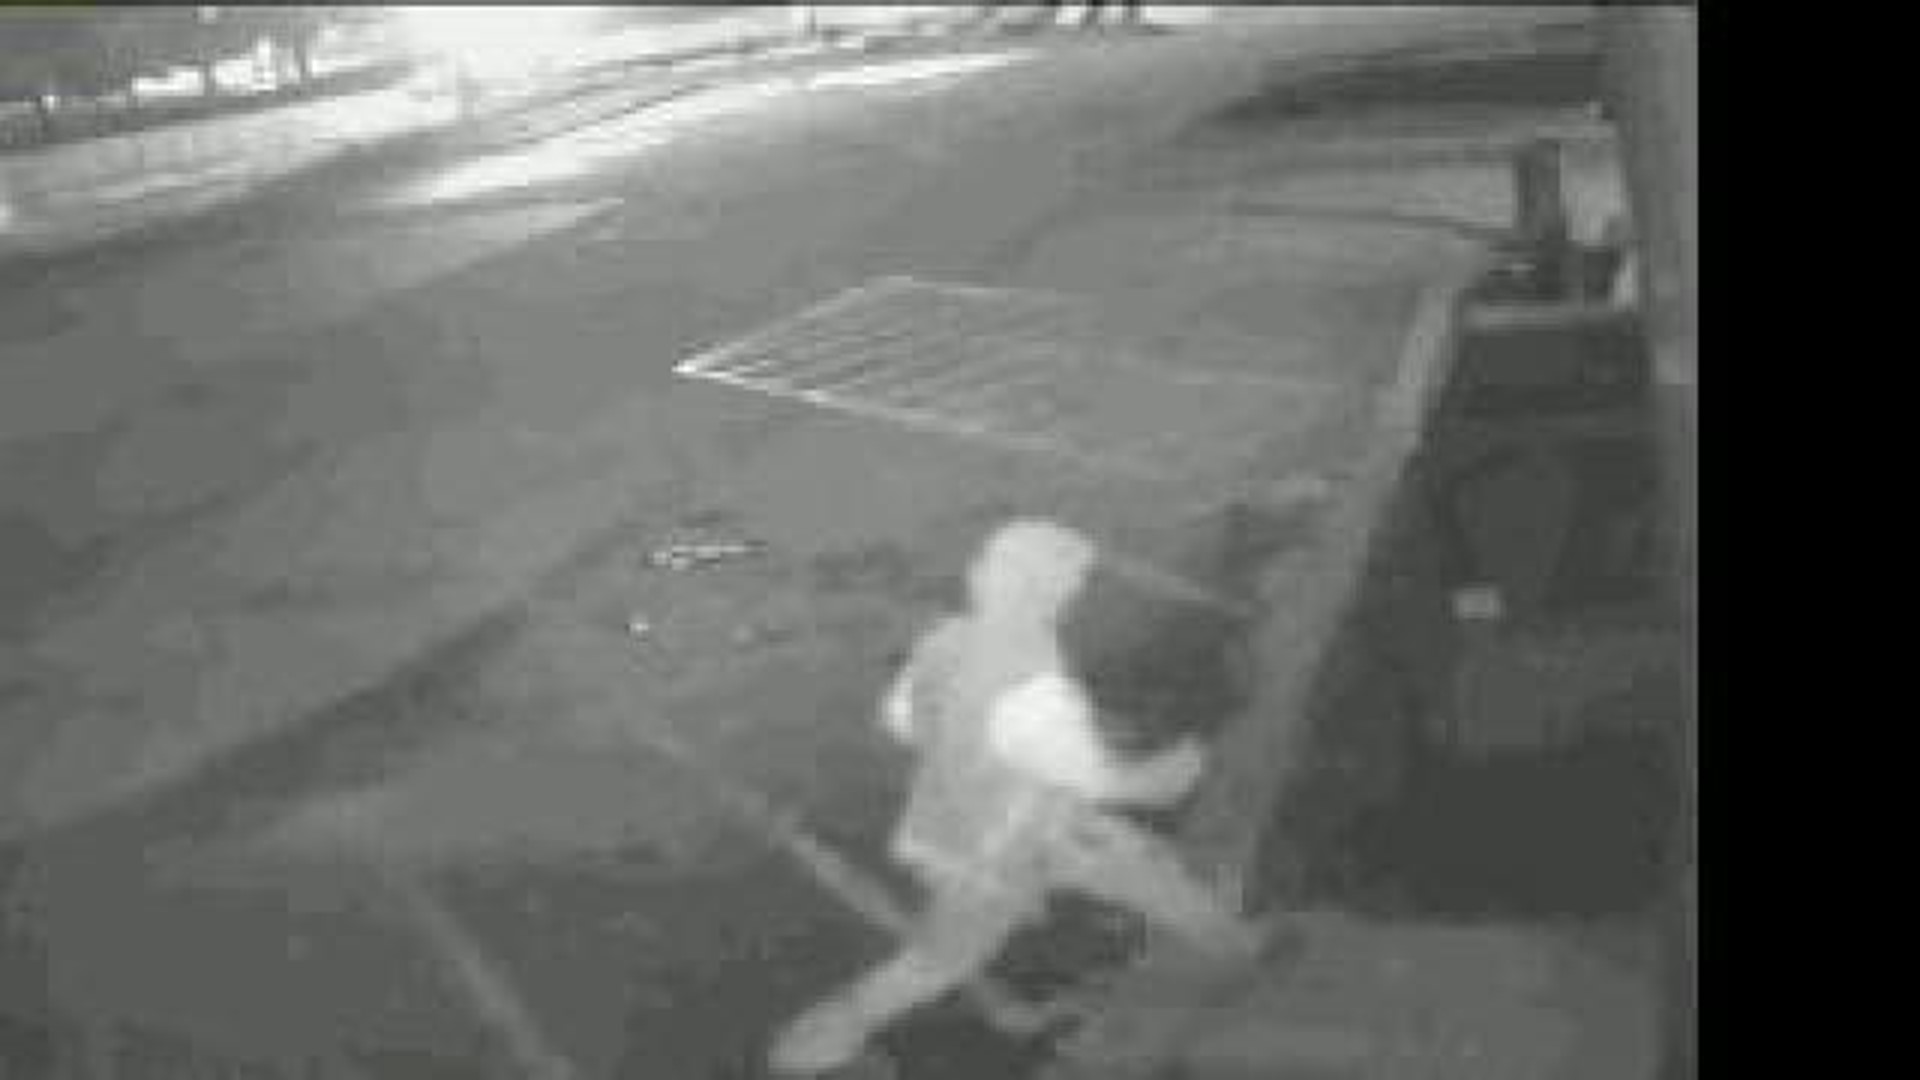 Police Release Video of Would-Be Burglars in Carbondale